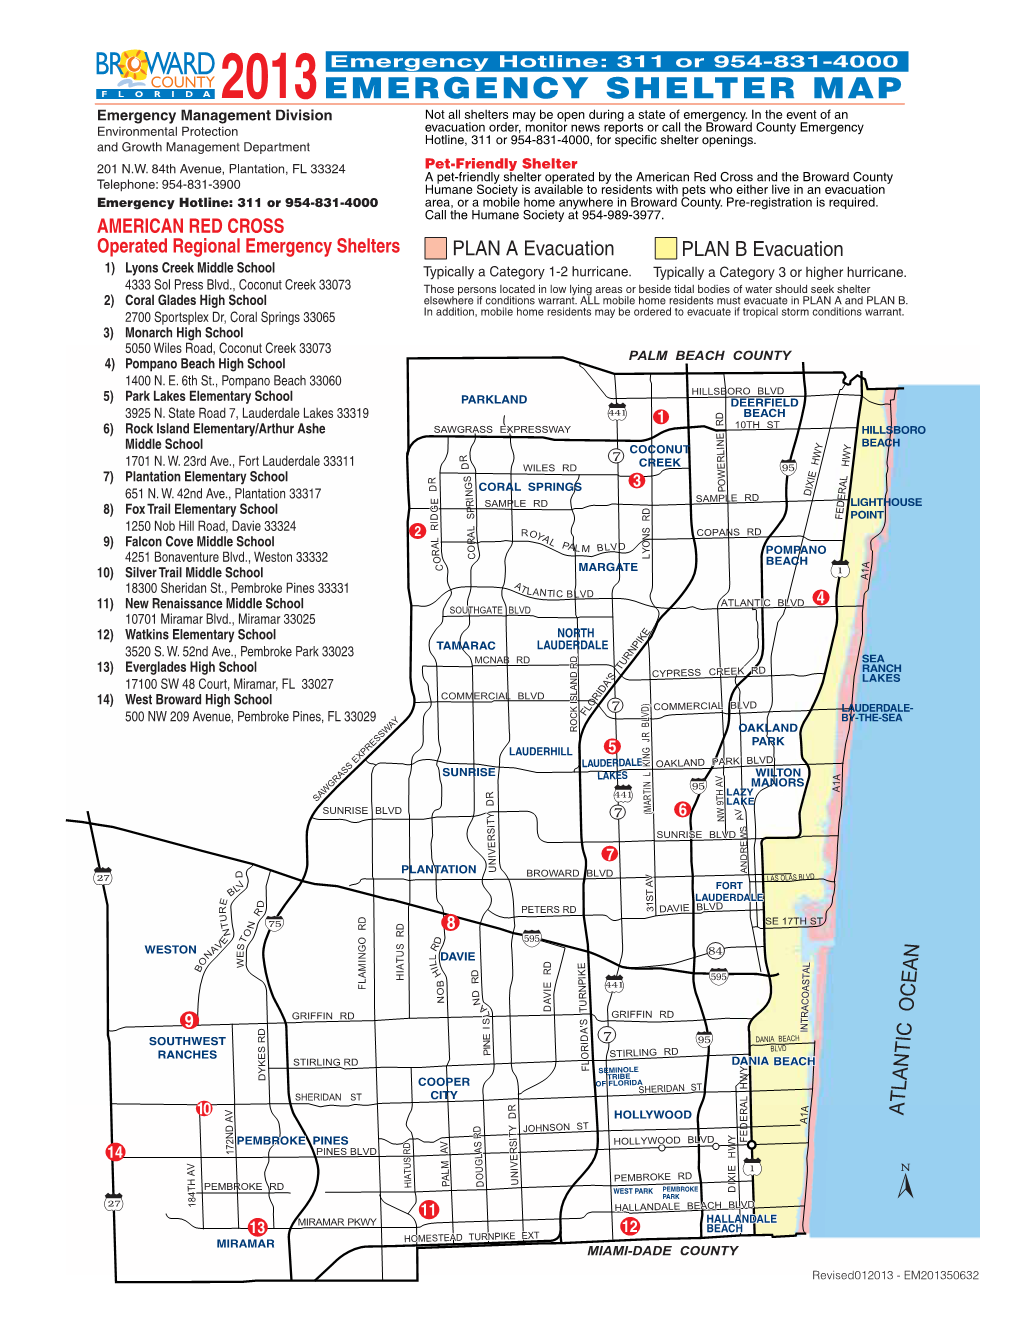 Download Broward County Emergency Shelter Map 2013